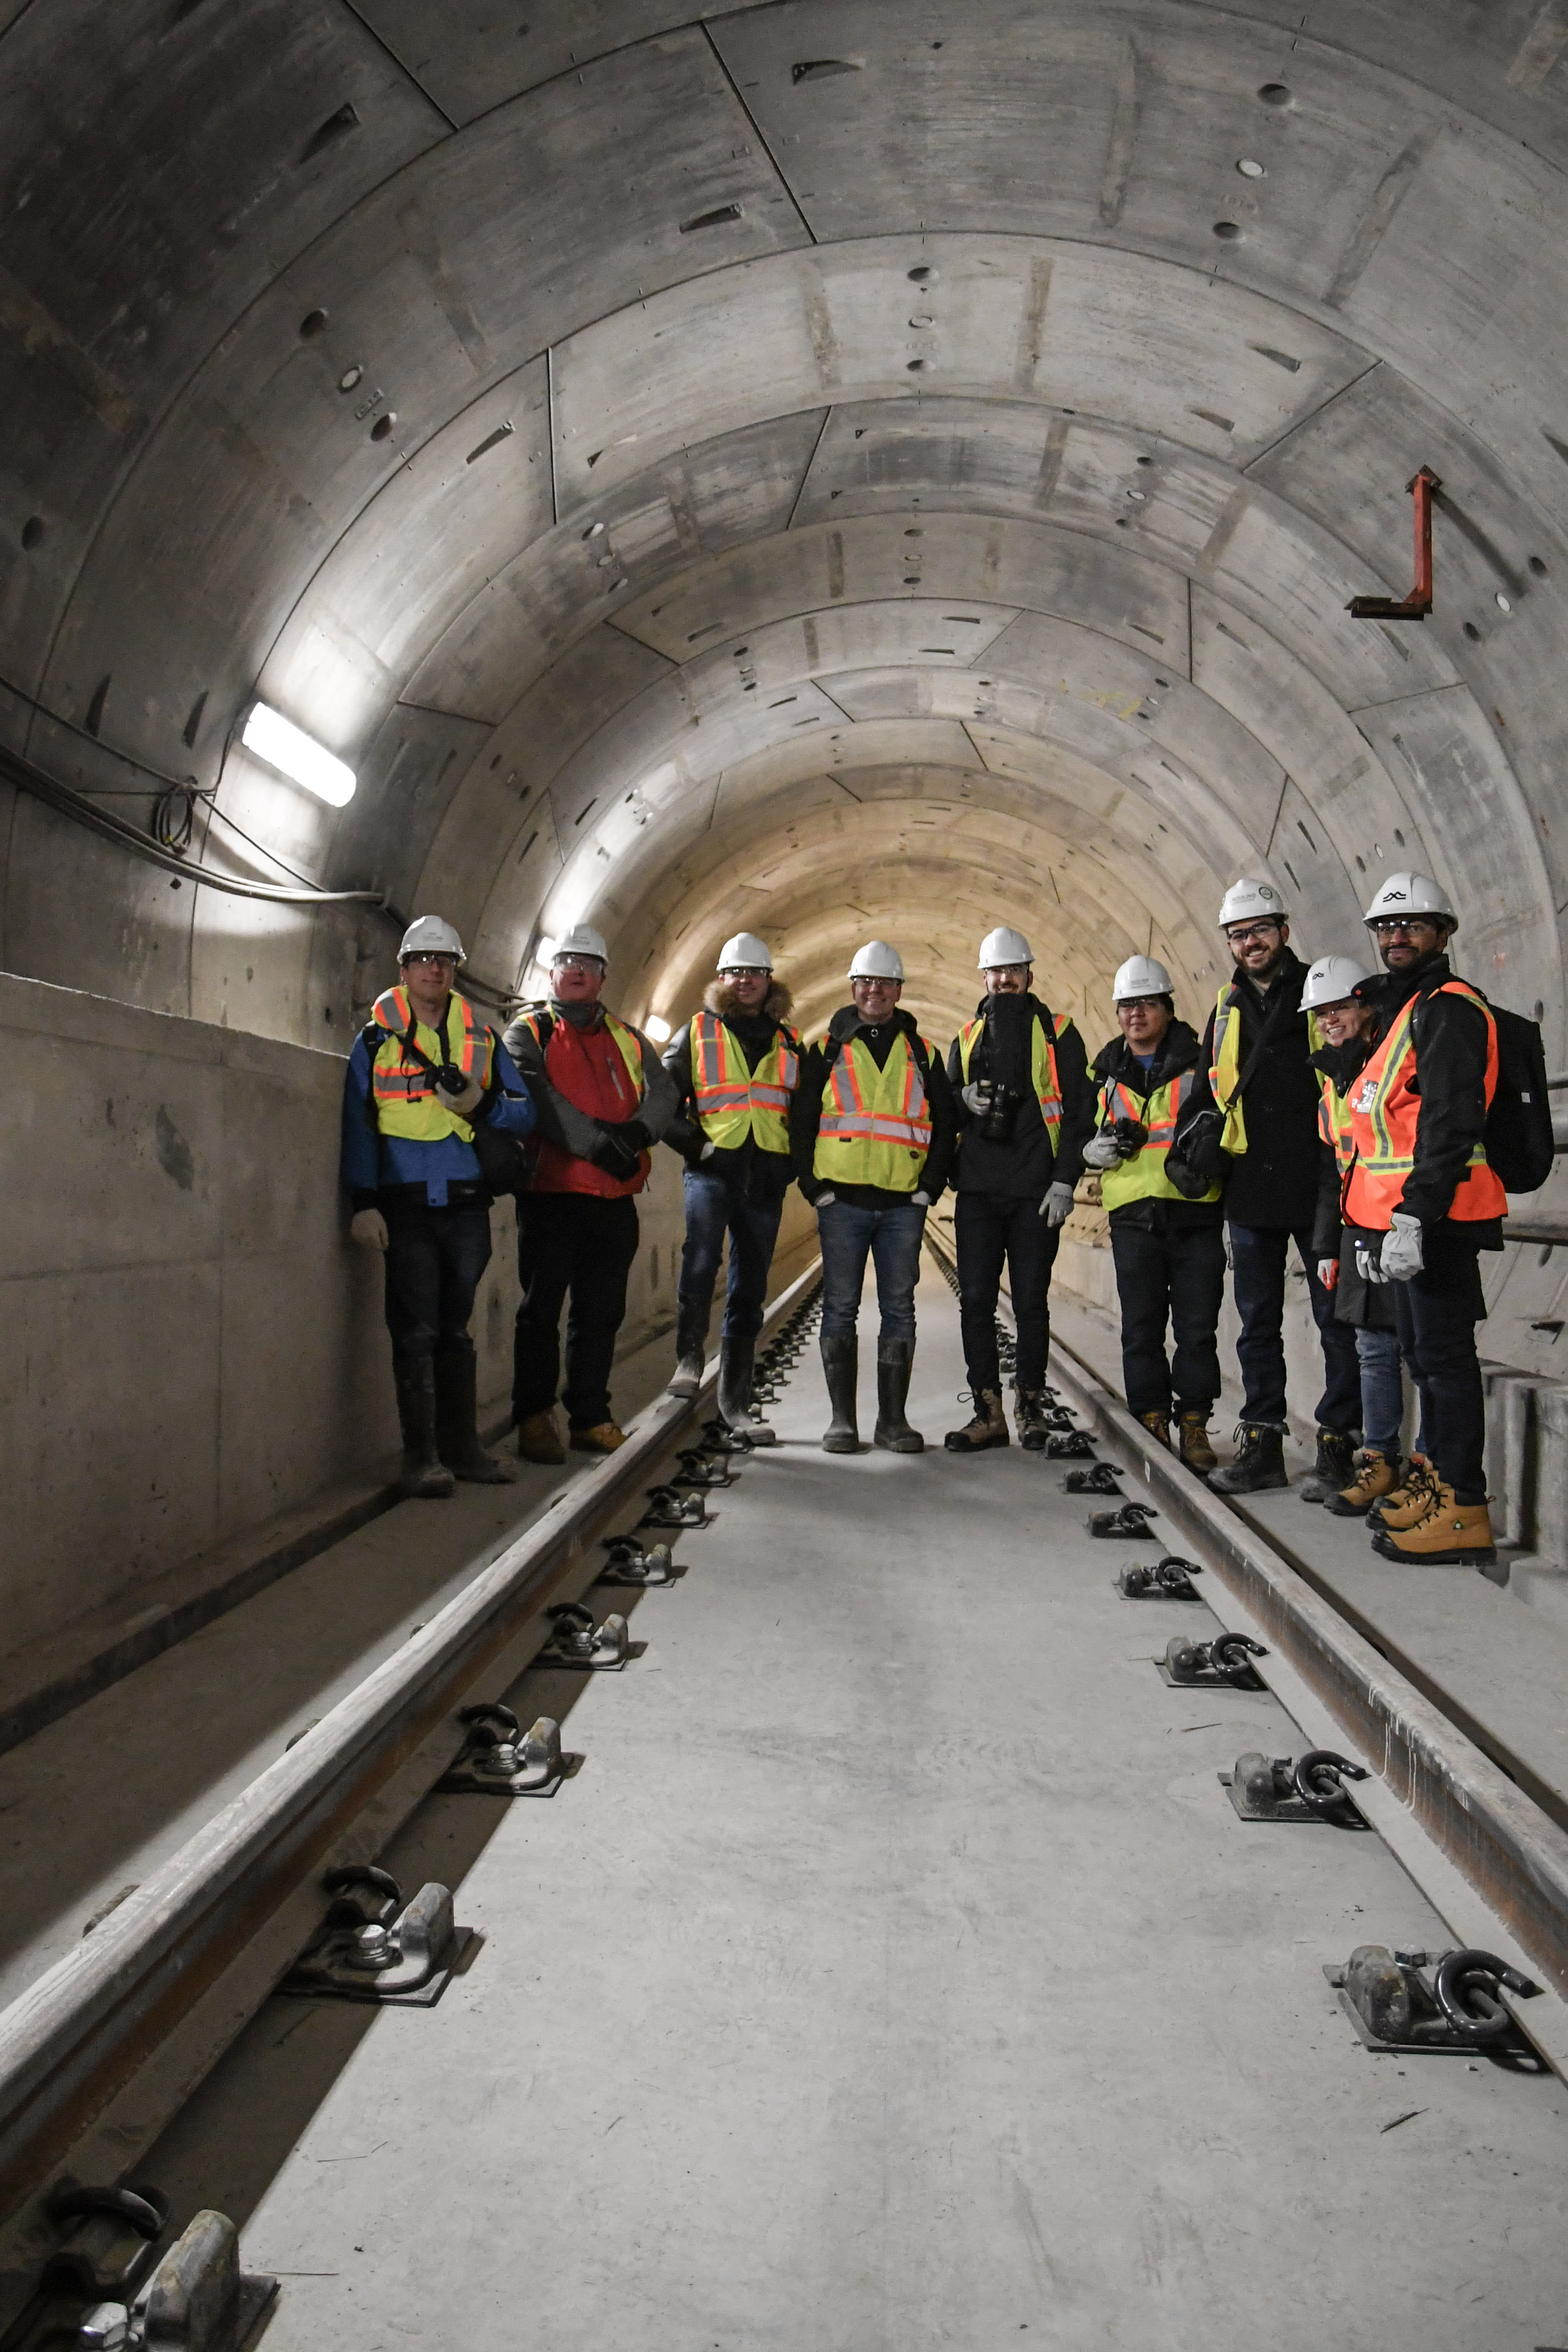 Nine people pose and look at the camera while standing on track and in a large concrete tunnel.